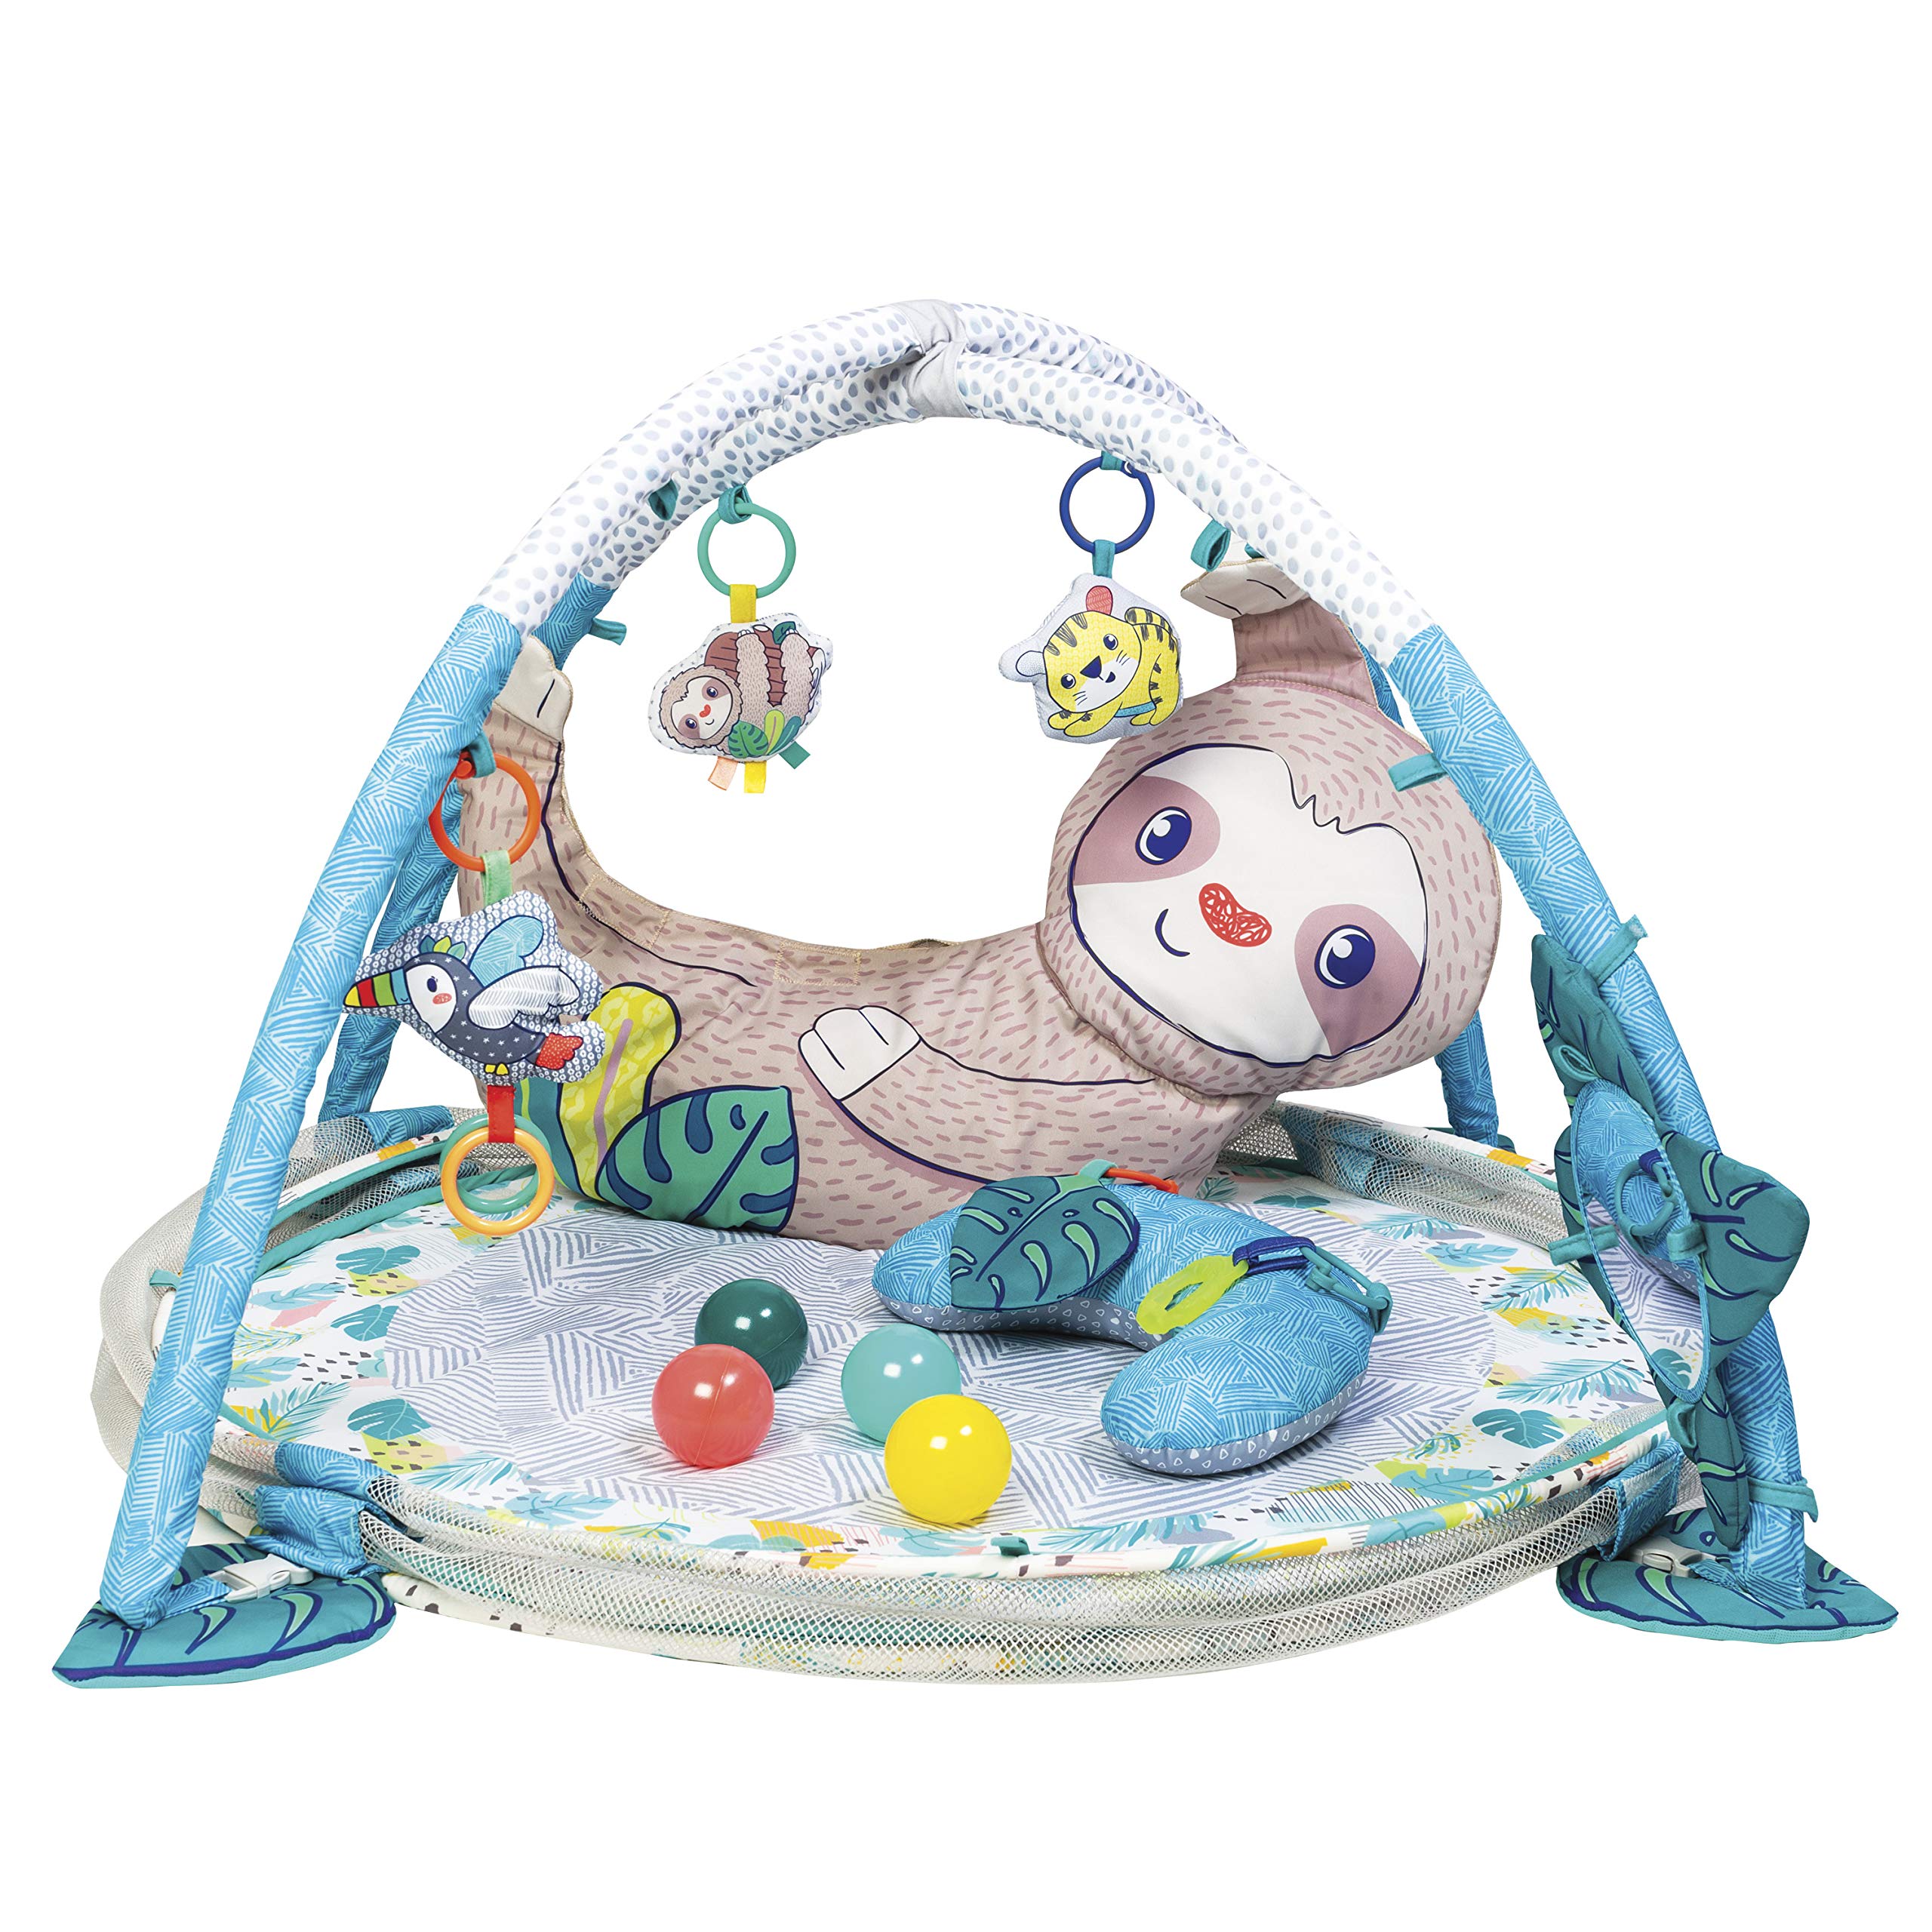 Infantino 4-in-1 Sloth Jumbo - Combination Baby Activity Gym and Ball Pit for Sensory Exploration and Motor Skill Development, for Newborns, Babies and Toddlers